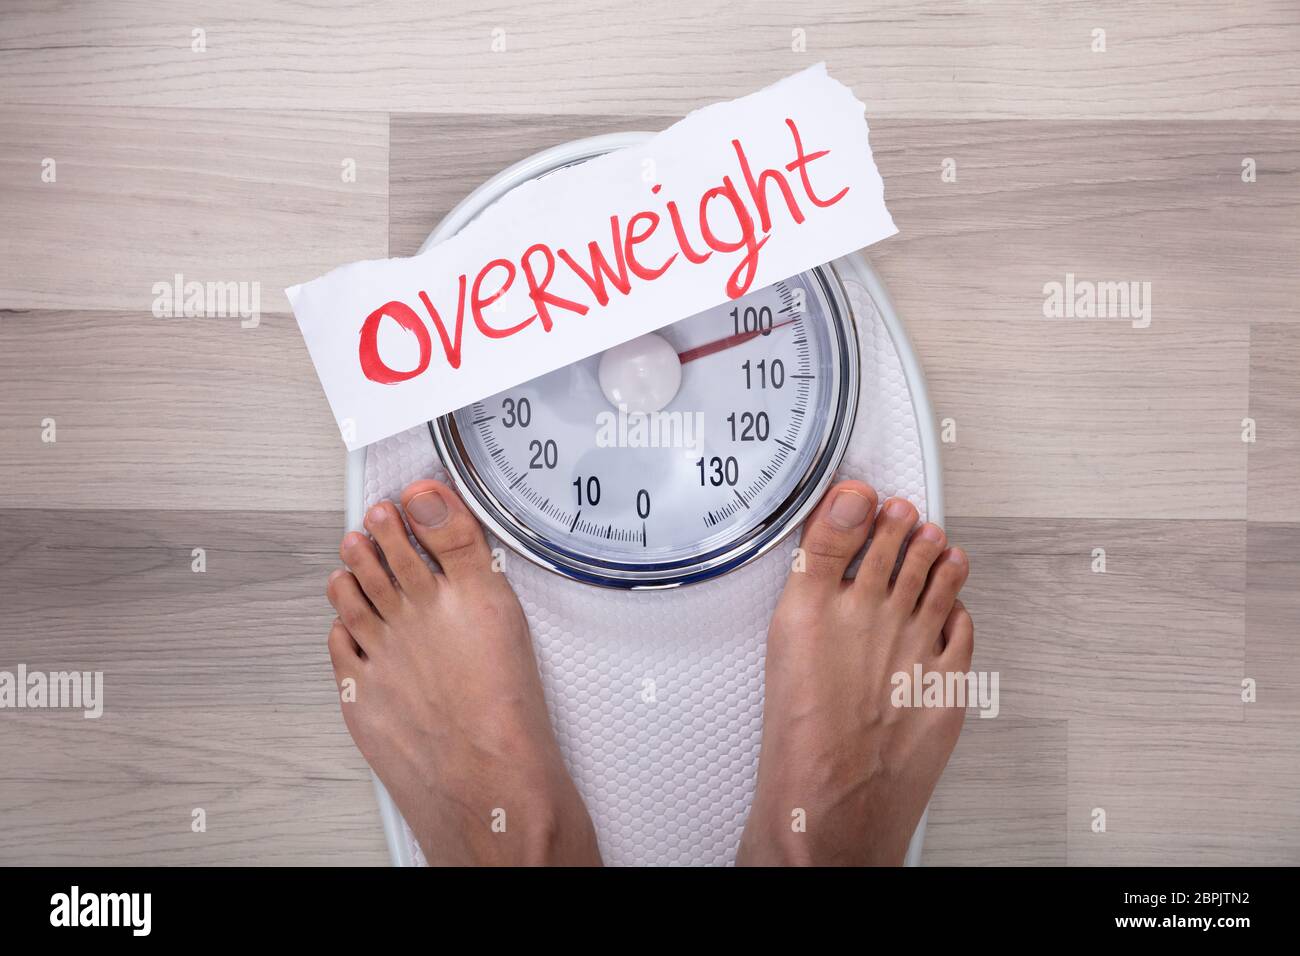 Weight Scale with Slice of Bread and Measuring Tape on White Bac Stock  Image - Image of exercising, kilogram: 60729625